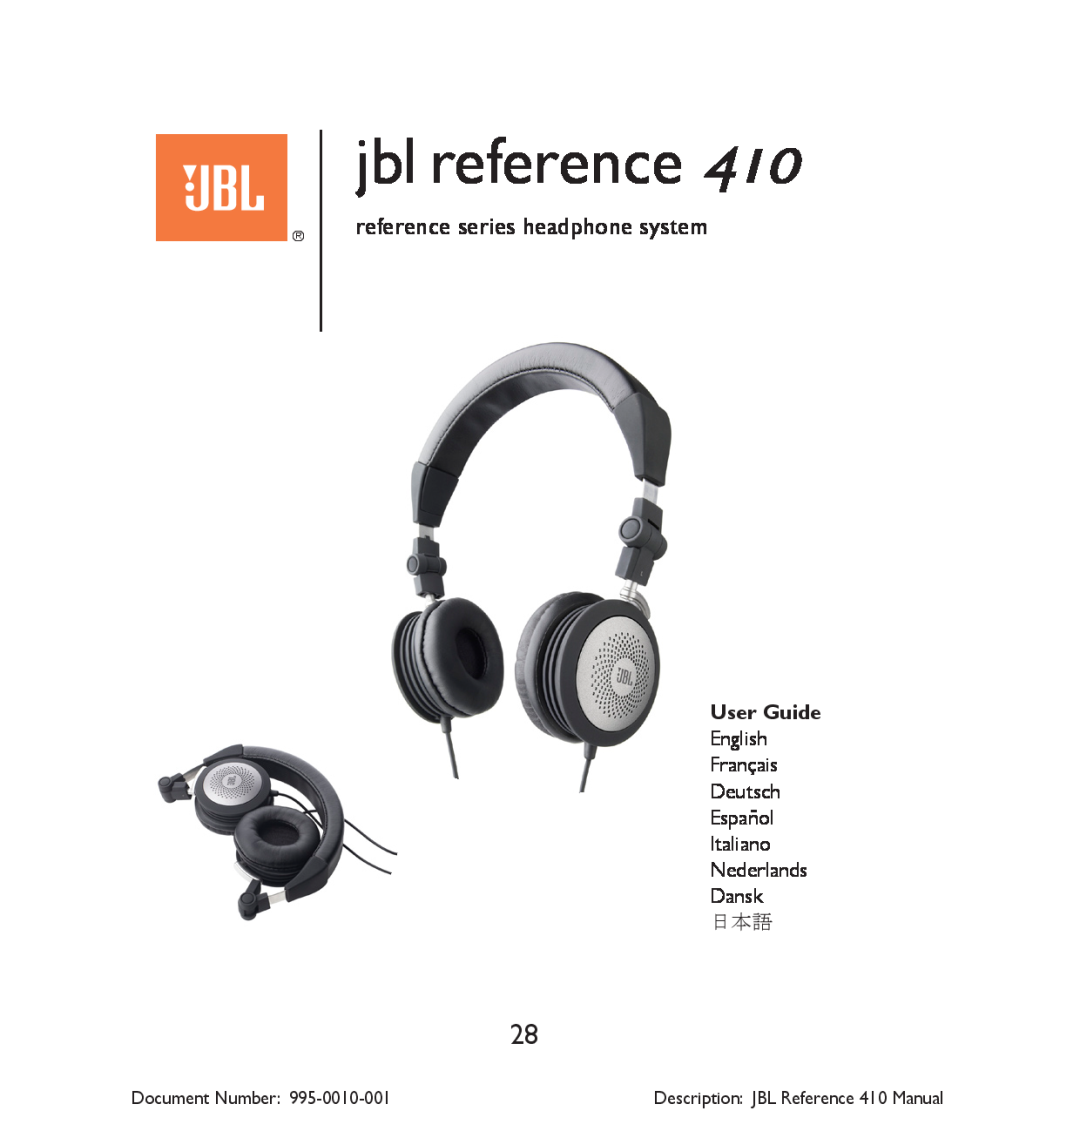 JBL 410 manual jbl reference, reference series headphone system, User Guide, Document Number 